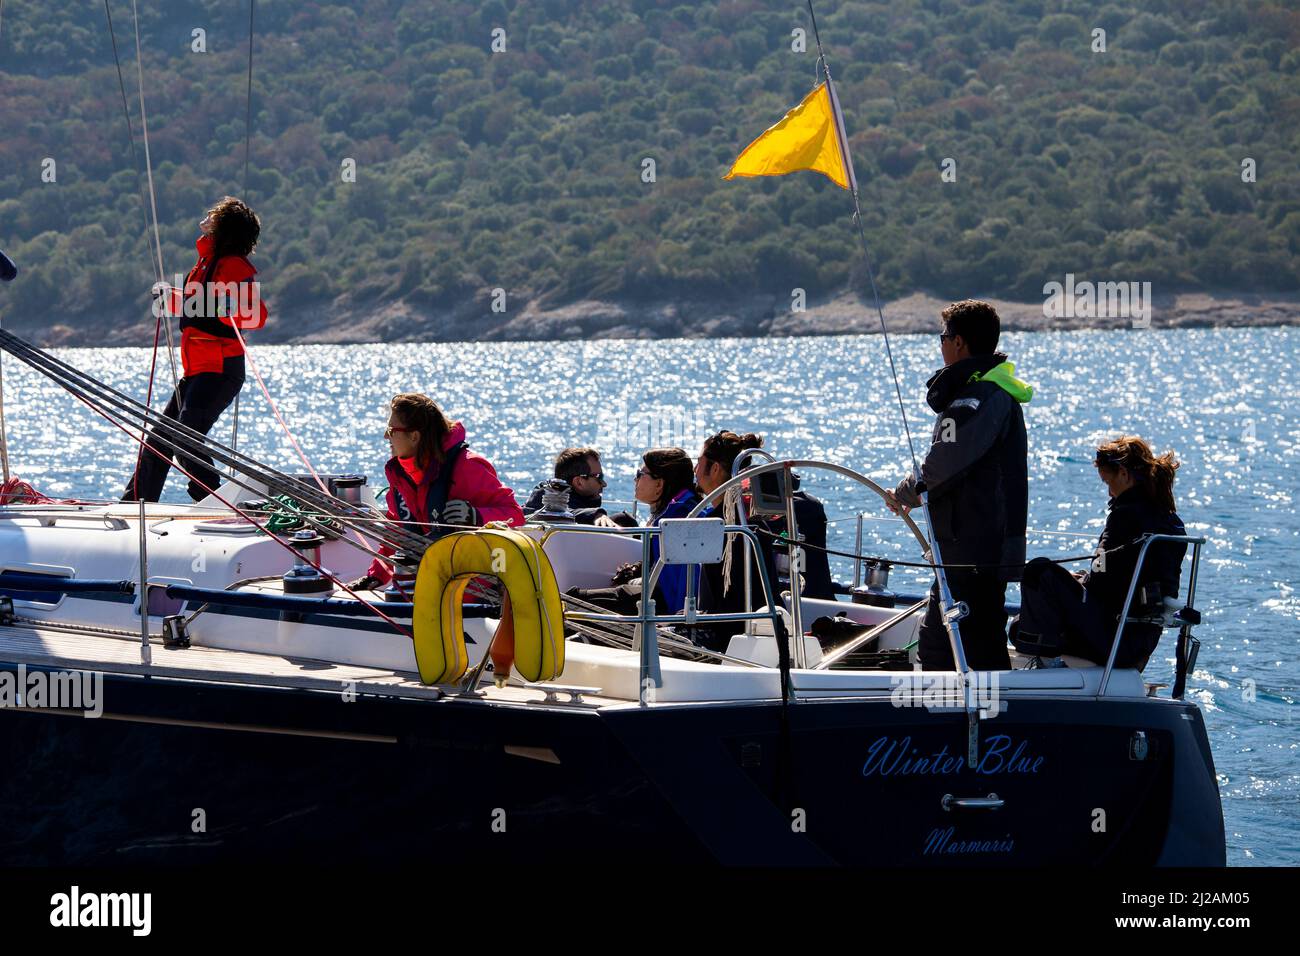 Bodrum, Mugla, Turkey - 02.25.2022: Teamwork and team spirit on deck of ship yacht sailing on blue waters of Aegean Sea. Sailboats sail in wind Stock Photo